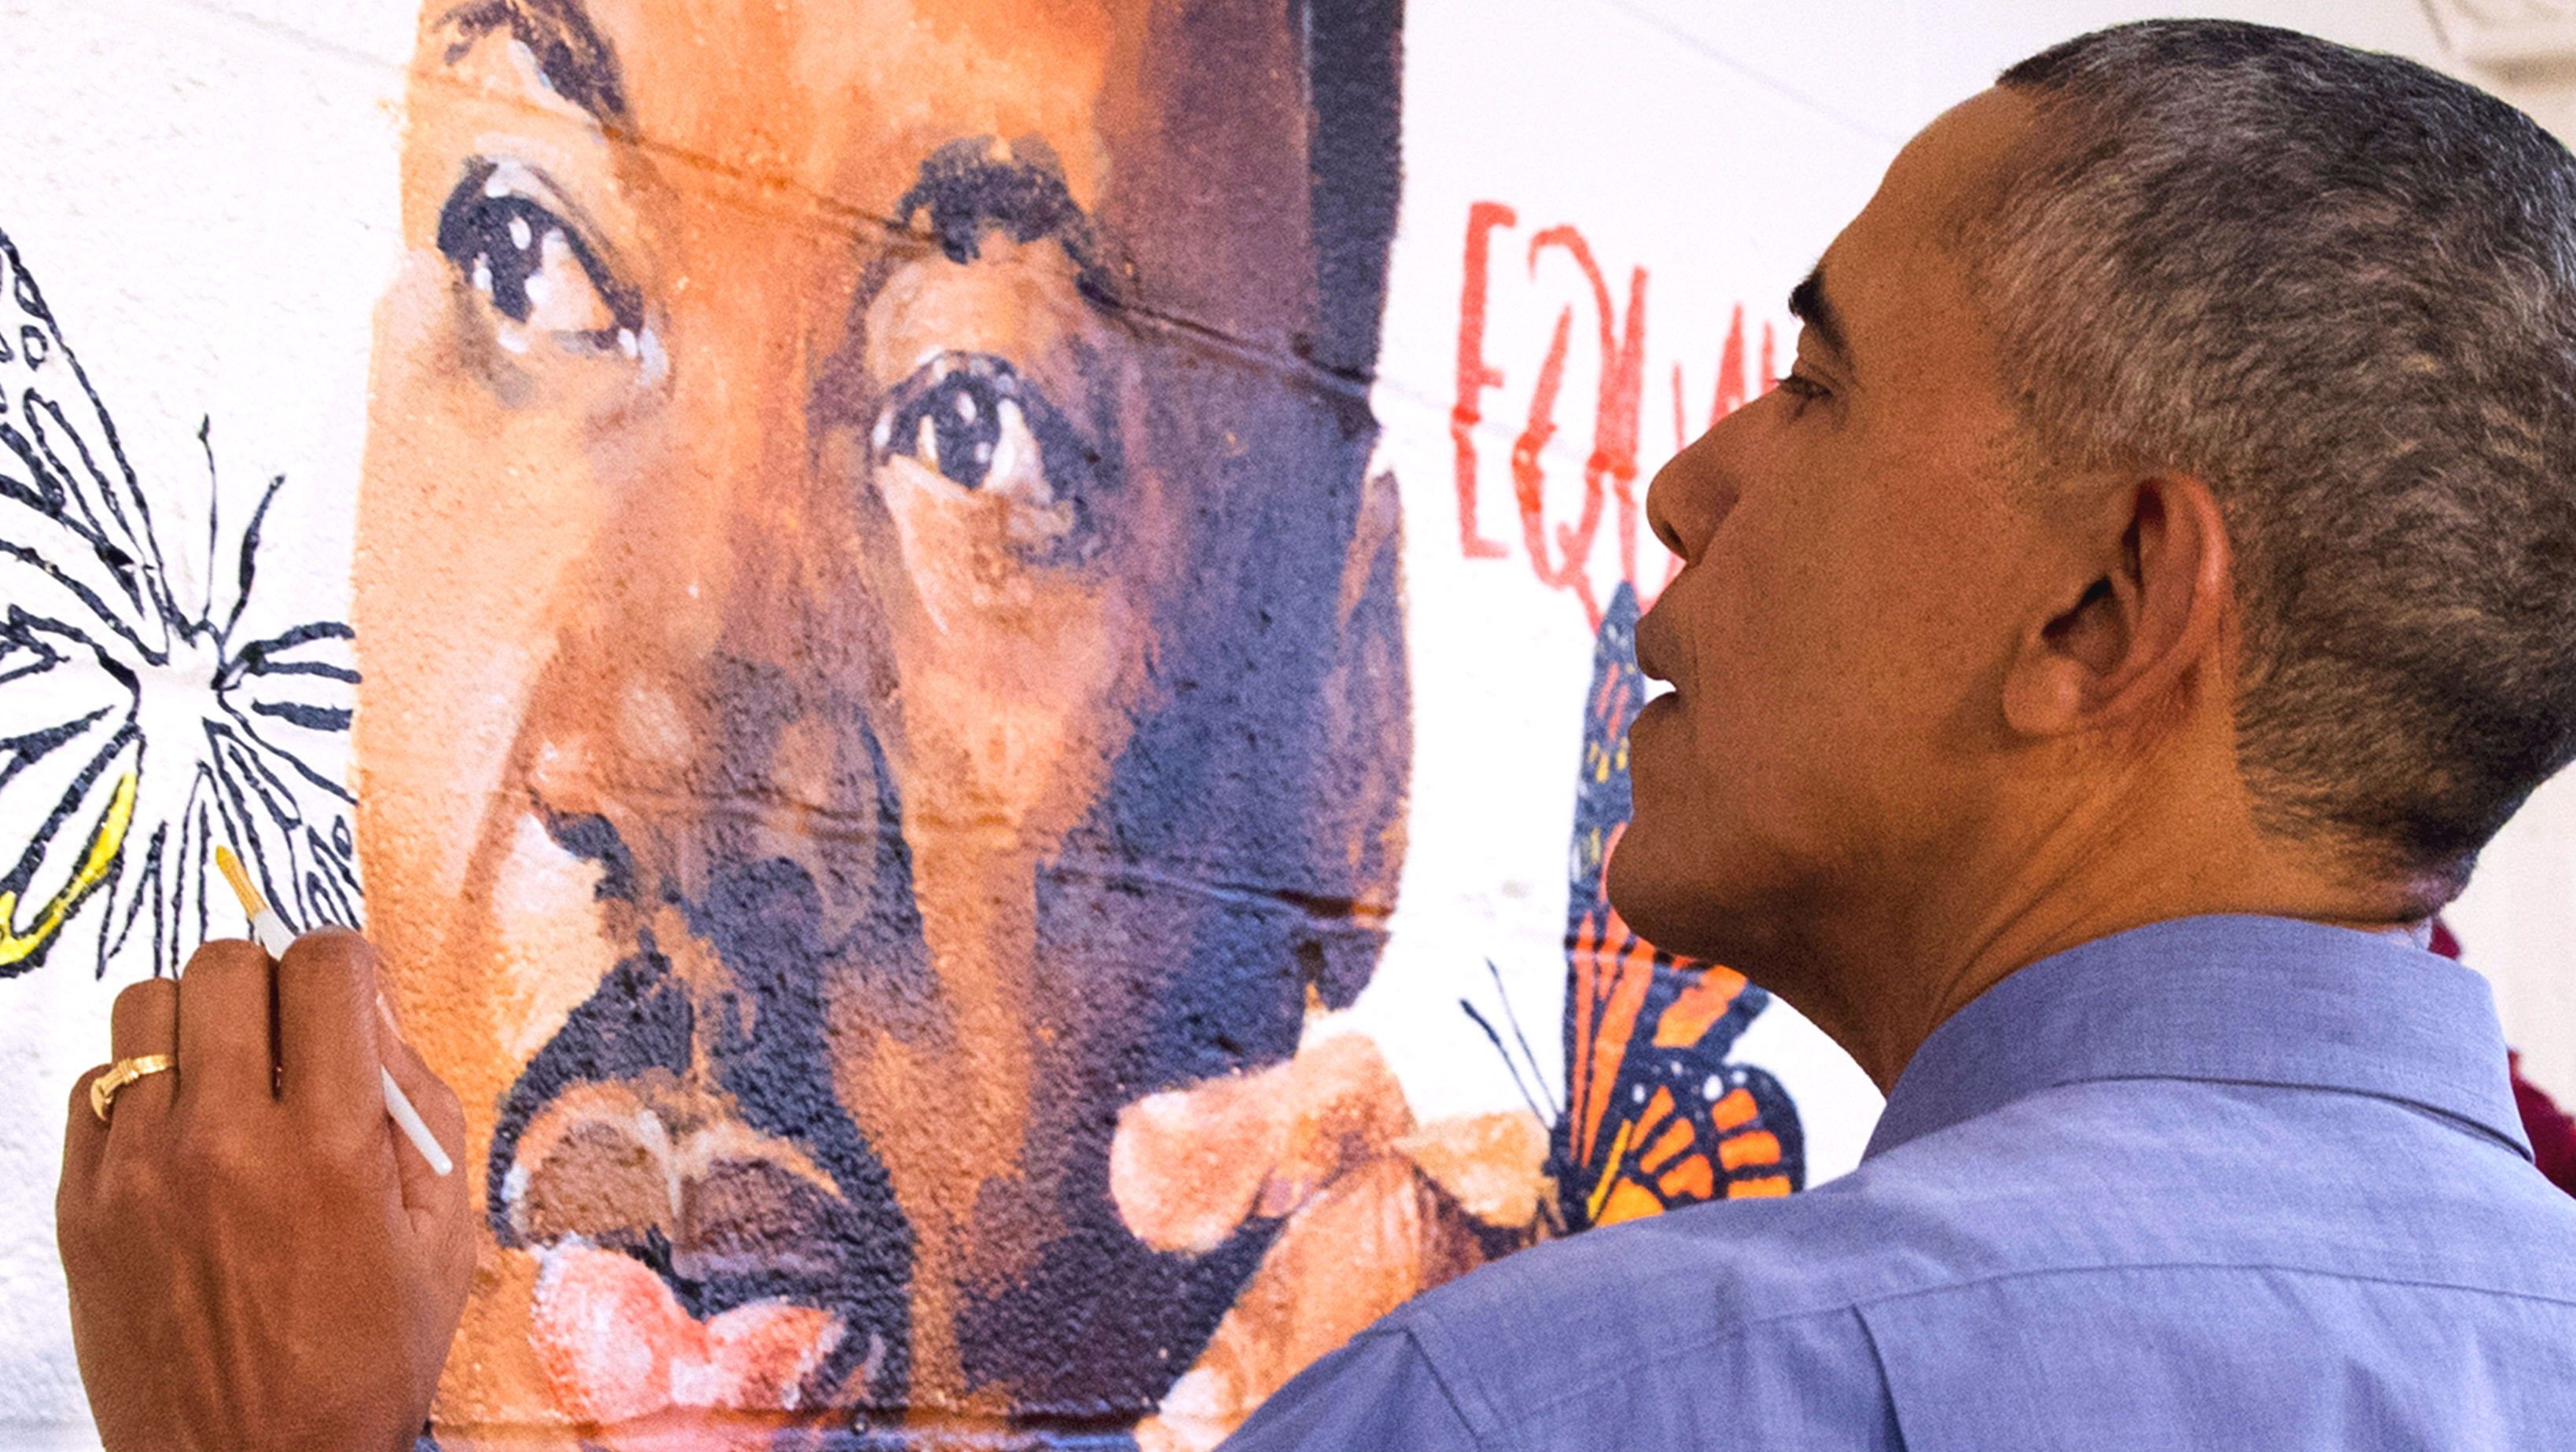 Barack Obama helps paint a mural depicting Martin Luther King Jr at a family shelter in Washington DC